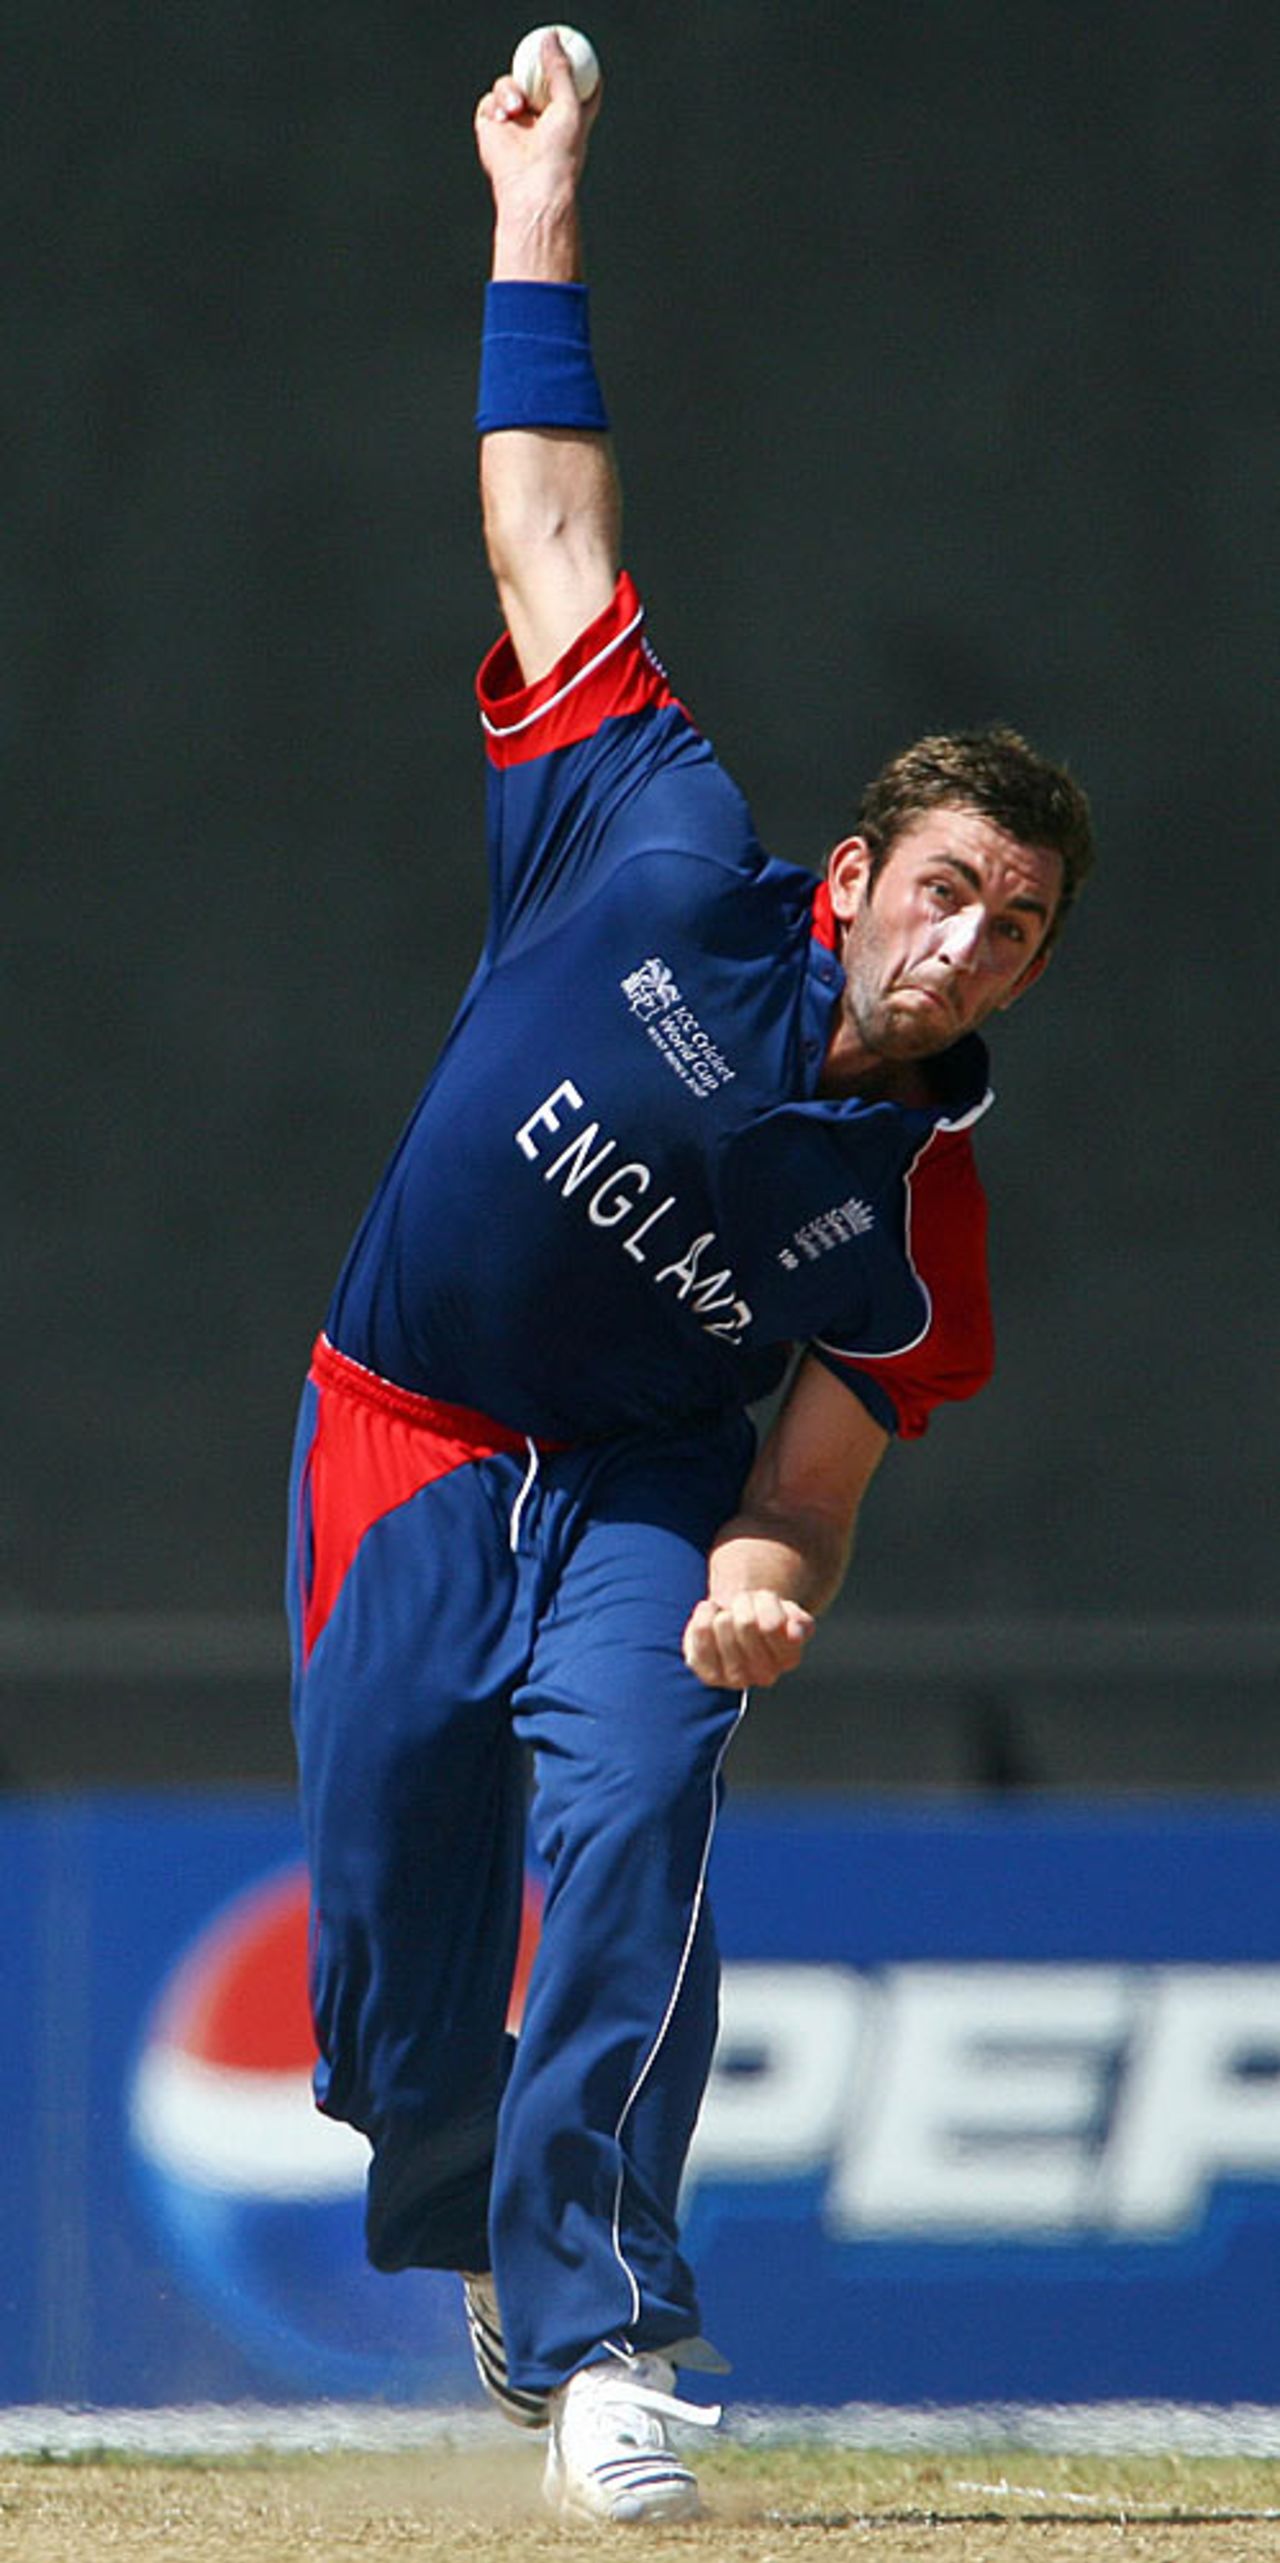 Liam Plunkett roars up to the crease, England v Bermuda, World Cup warm-up, Arnos Vale, March 5, 2007